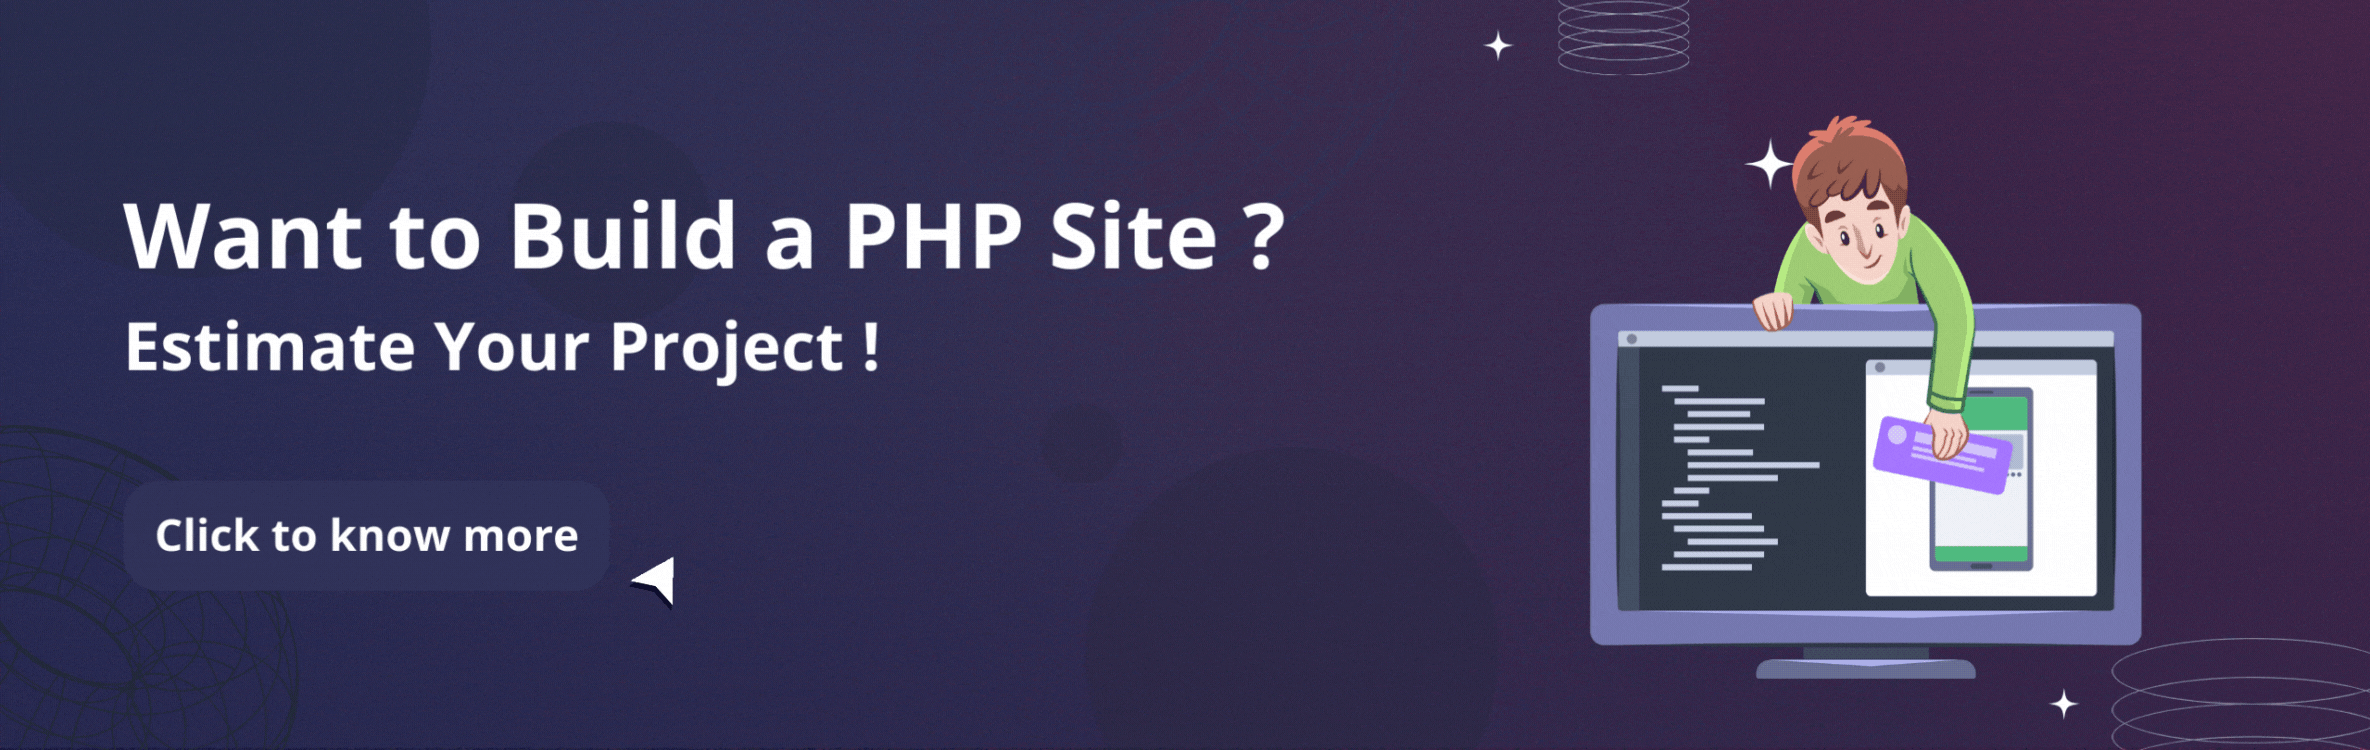  Want to Build a PHP Site